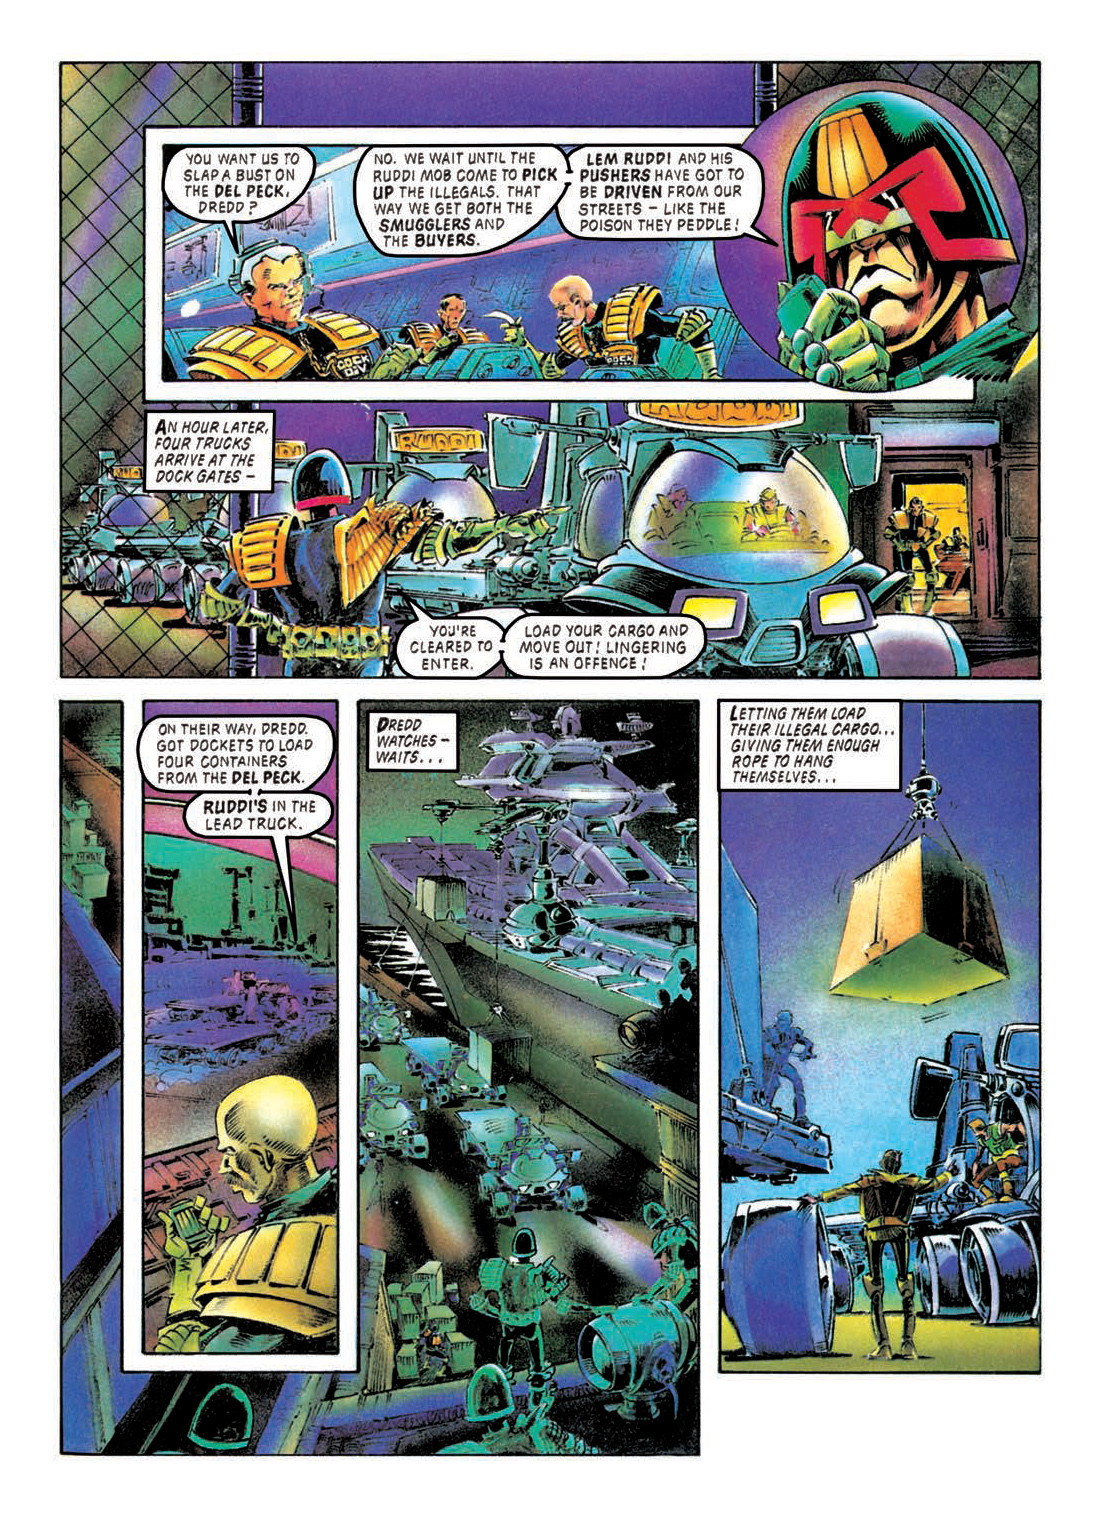 Read online Judge Dredd: The Restricted Files comic -  Issue # TPB 2 - 18